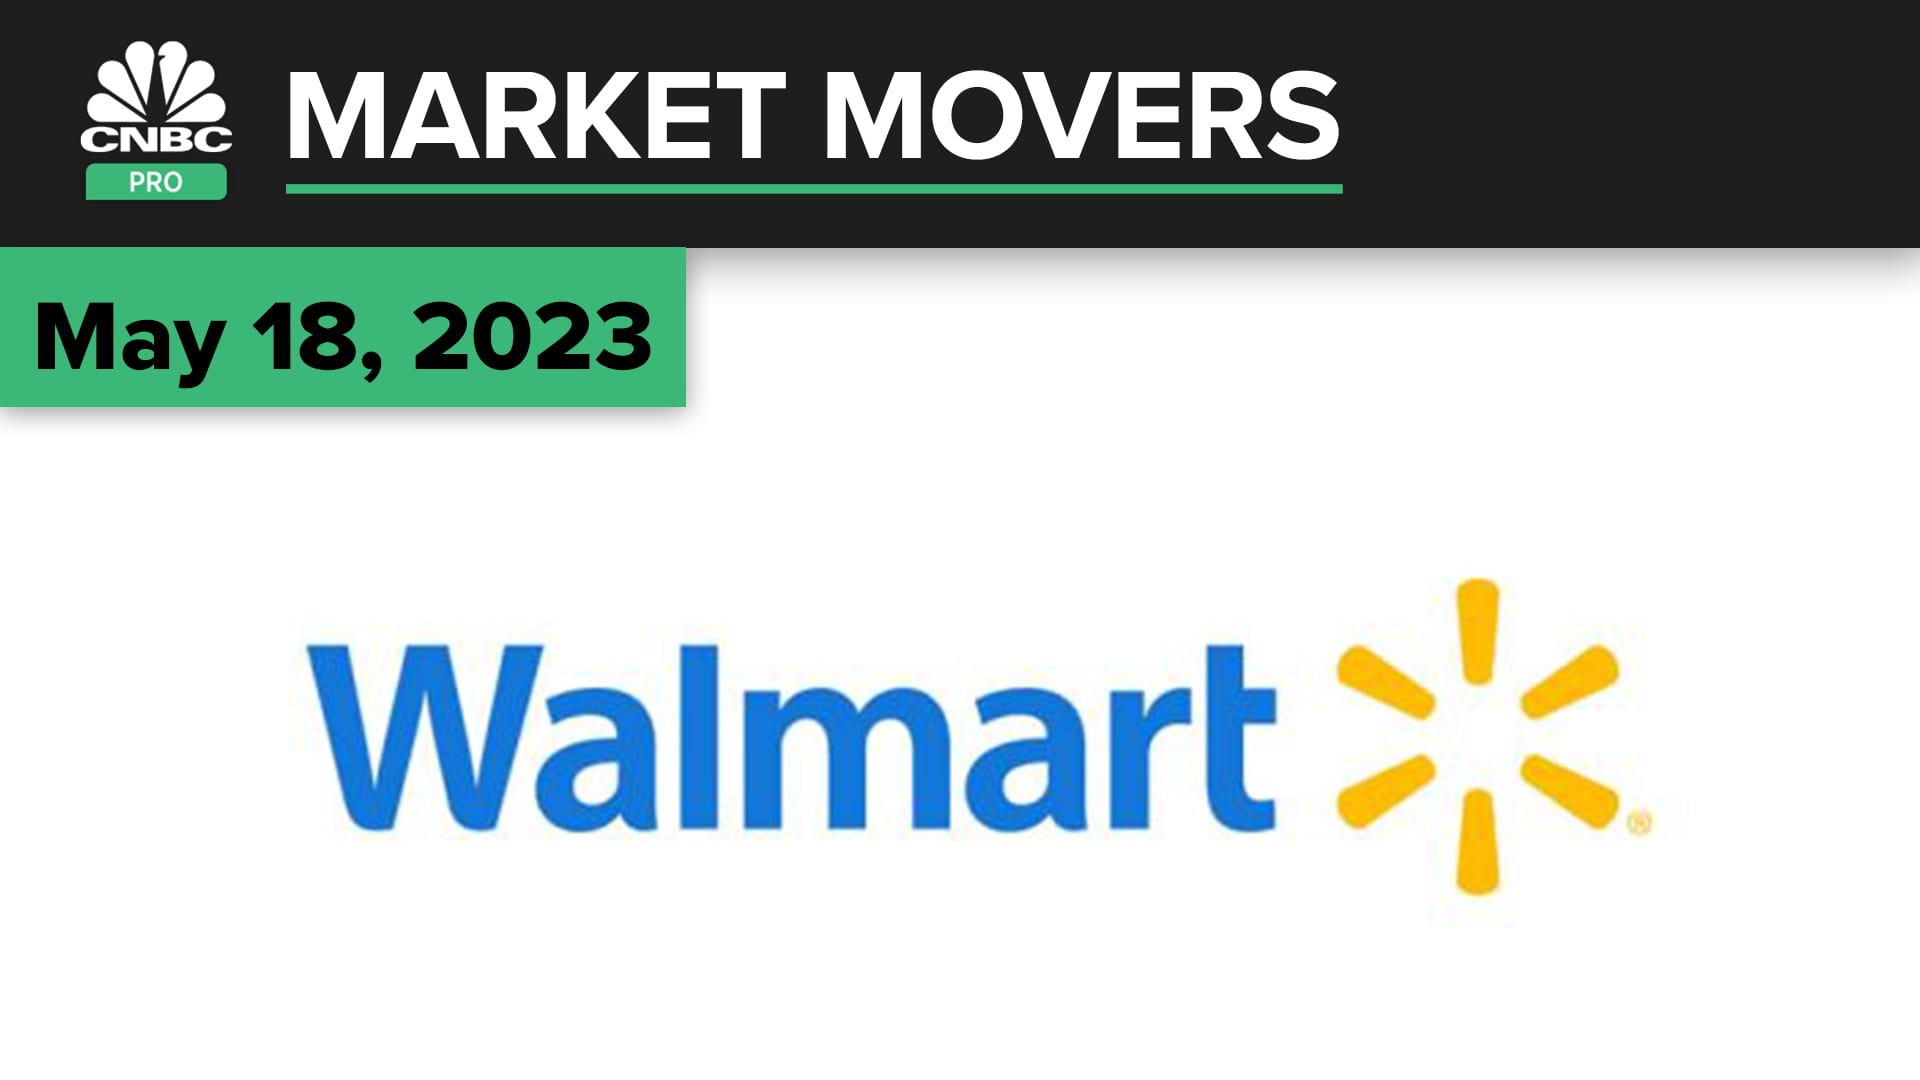 Walmart shares rise slightly on higher full-year guidance. Here's how to play the stock